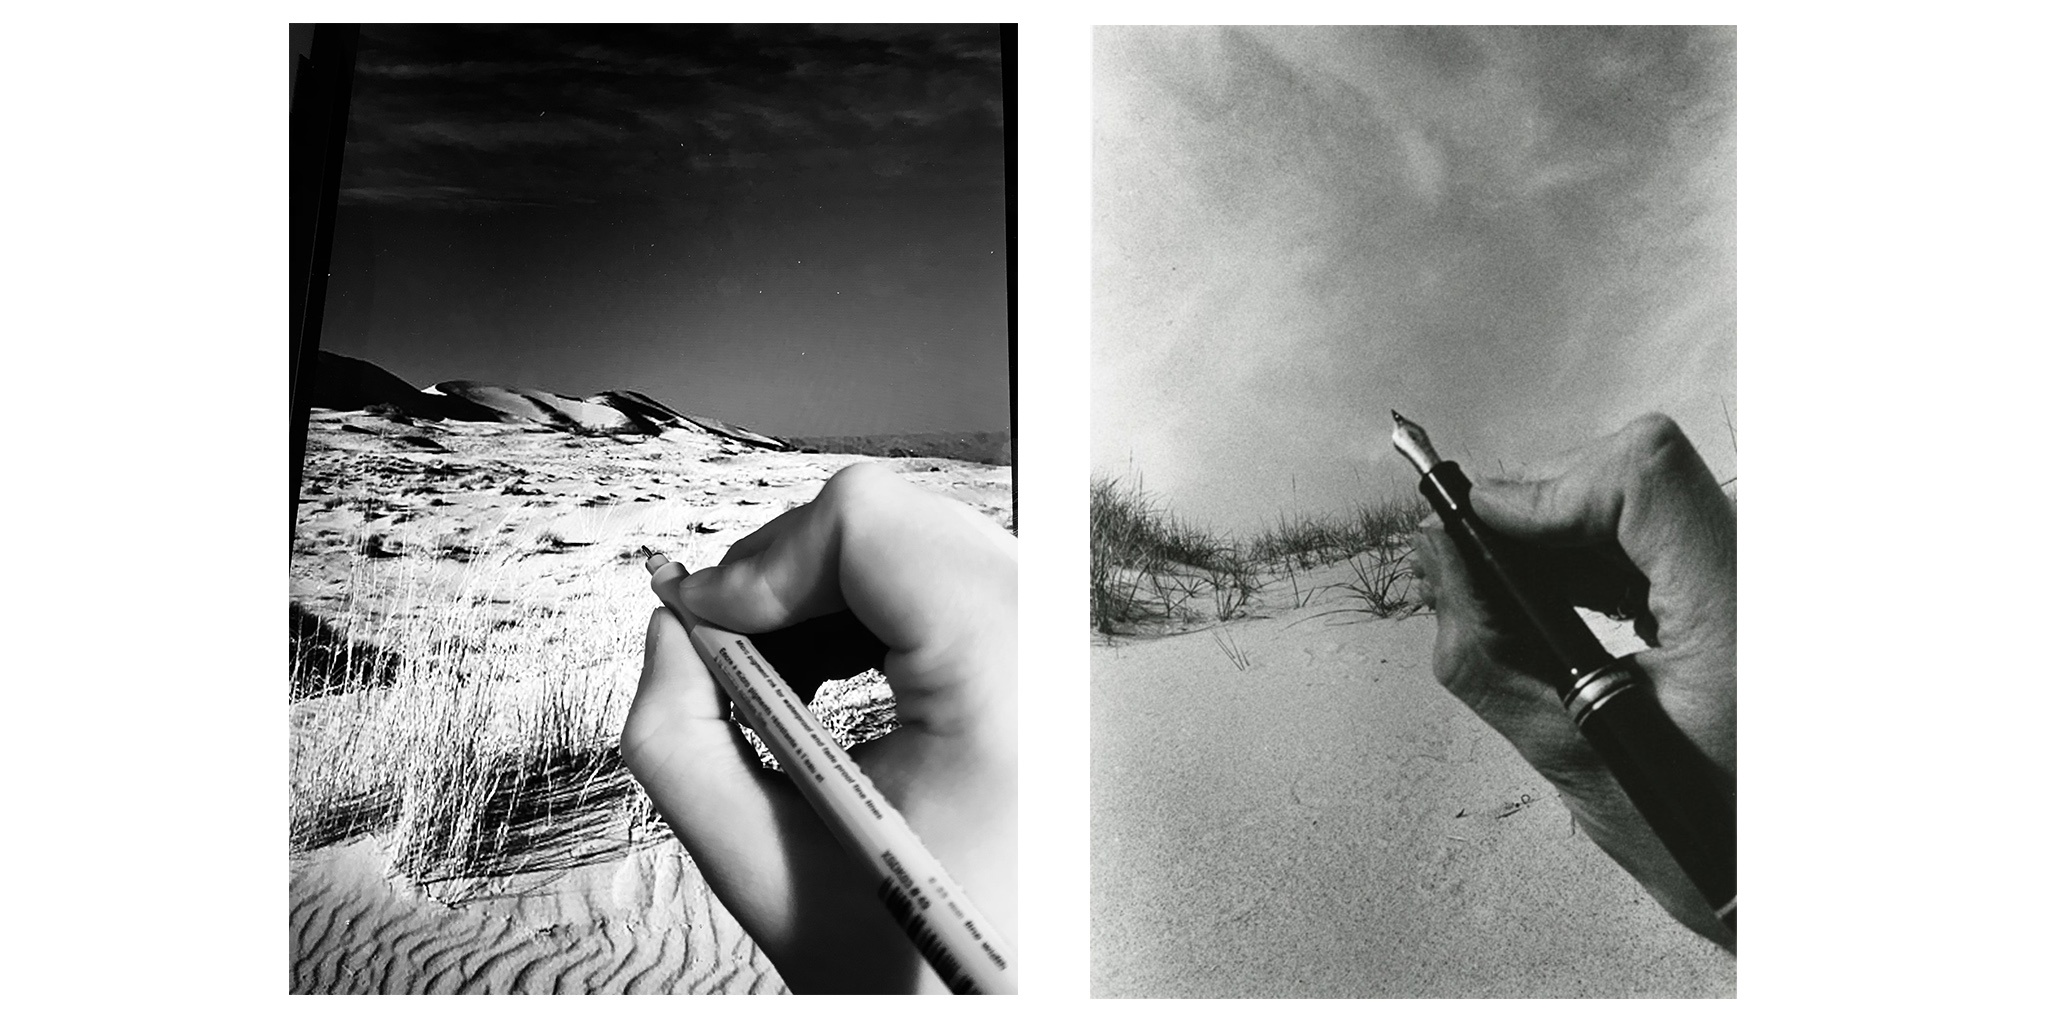 Margaret McCurdy '24 [re-creates Ralph Gibson's _Pen/Dunes (from the Somnambulist)_, 1968, gelatin silver print, 13 7/8 x 10 7/8 inches, The Jack Shear Collection of Photography at the Tang Teaching Museum, 2015.1.442](https://tang.skidmore.edu/collection/artworks/273-pen-dunes-from-the-somnambulist)